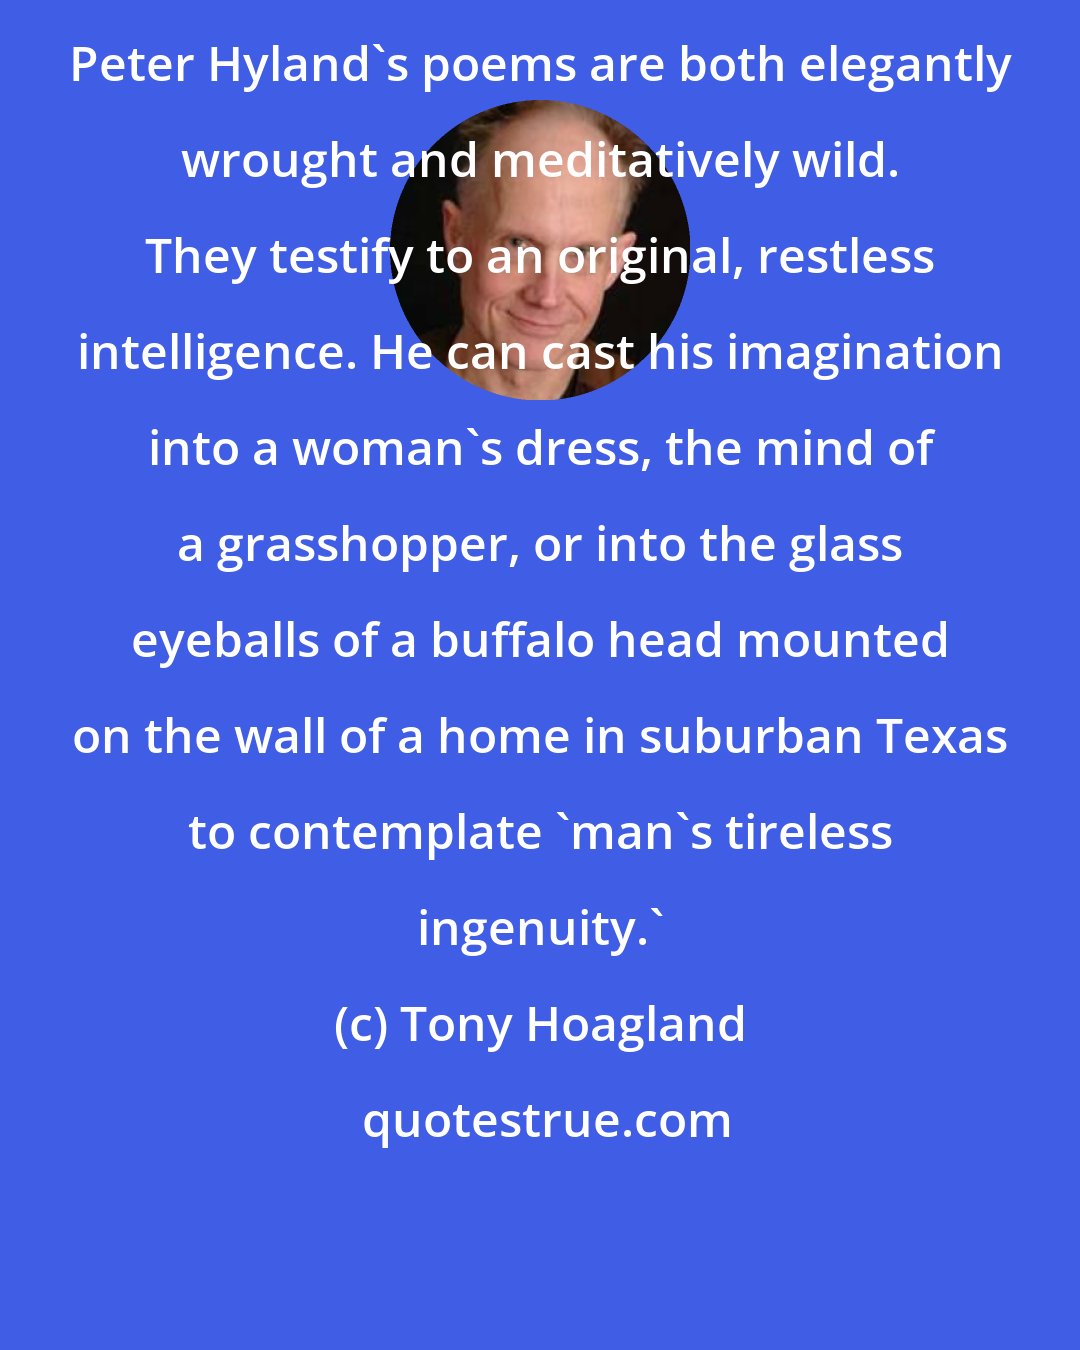 Tony Hoagland: Peter Hyland's poems are both elegantly wrought and meditatively wild. They testify to an original, restless intelligence. He can cast his imagination into a woman's dress, the mind of a grasshopper, or into the glass eyeballs of a buffalo head mounted on the wall of a home in suburban Texas to contemplate 'man's tireless ingenuity.'